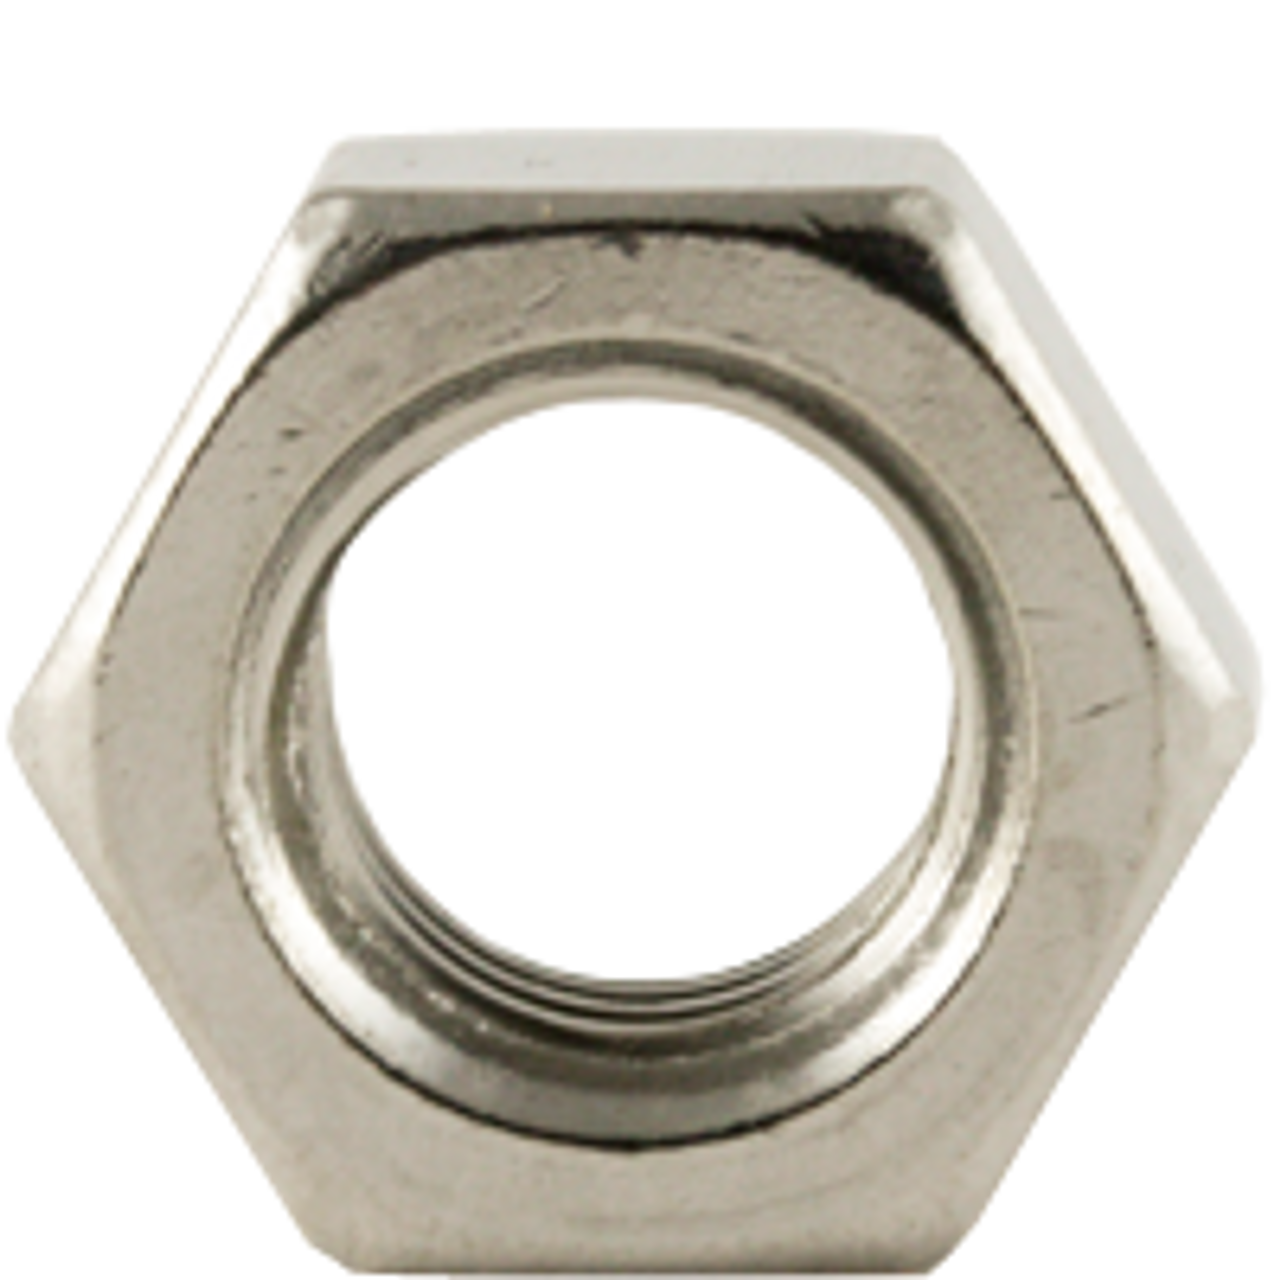 M8-1.25 DIN 934 Hex Nuts A2 Stainless Bulk